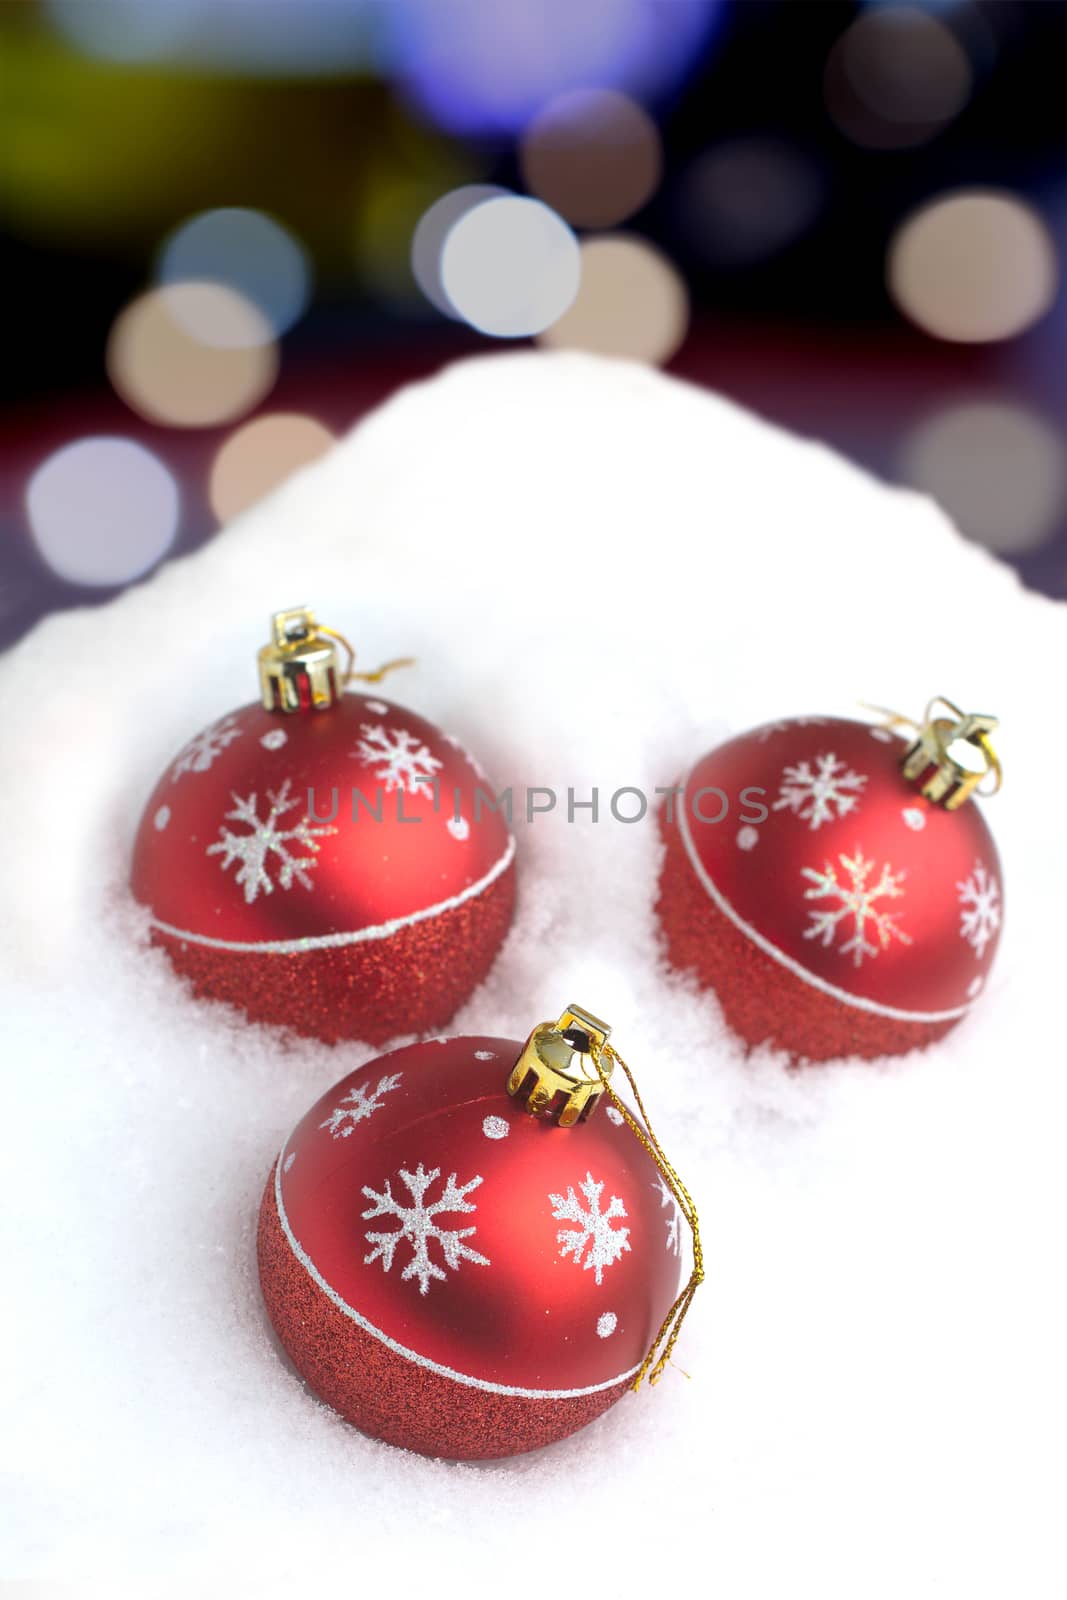 Red Christmas balls with painted snowflakes lying in clean white snowdrift against color circles on dark background vertical view closeup